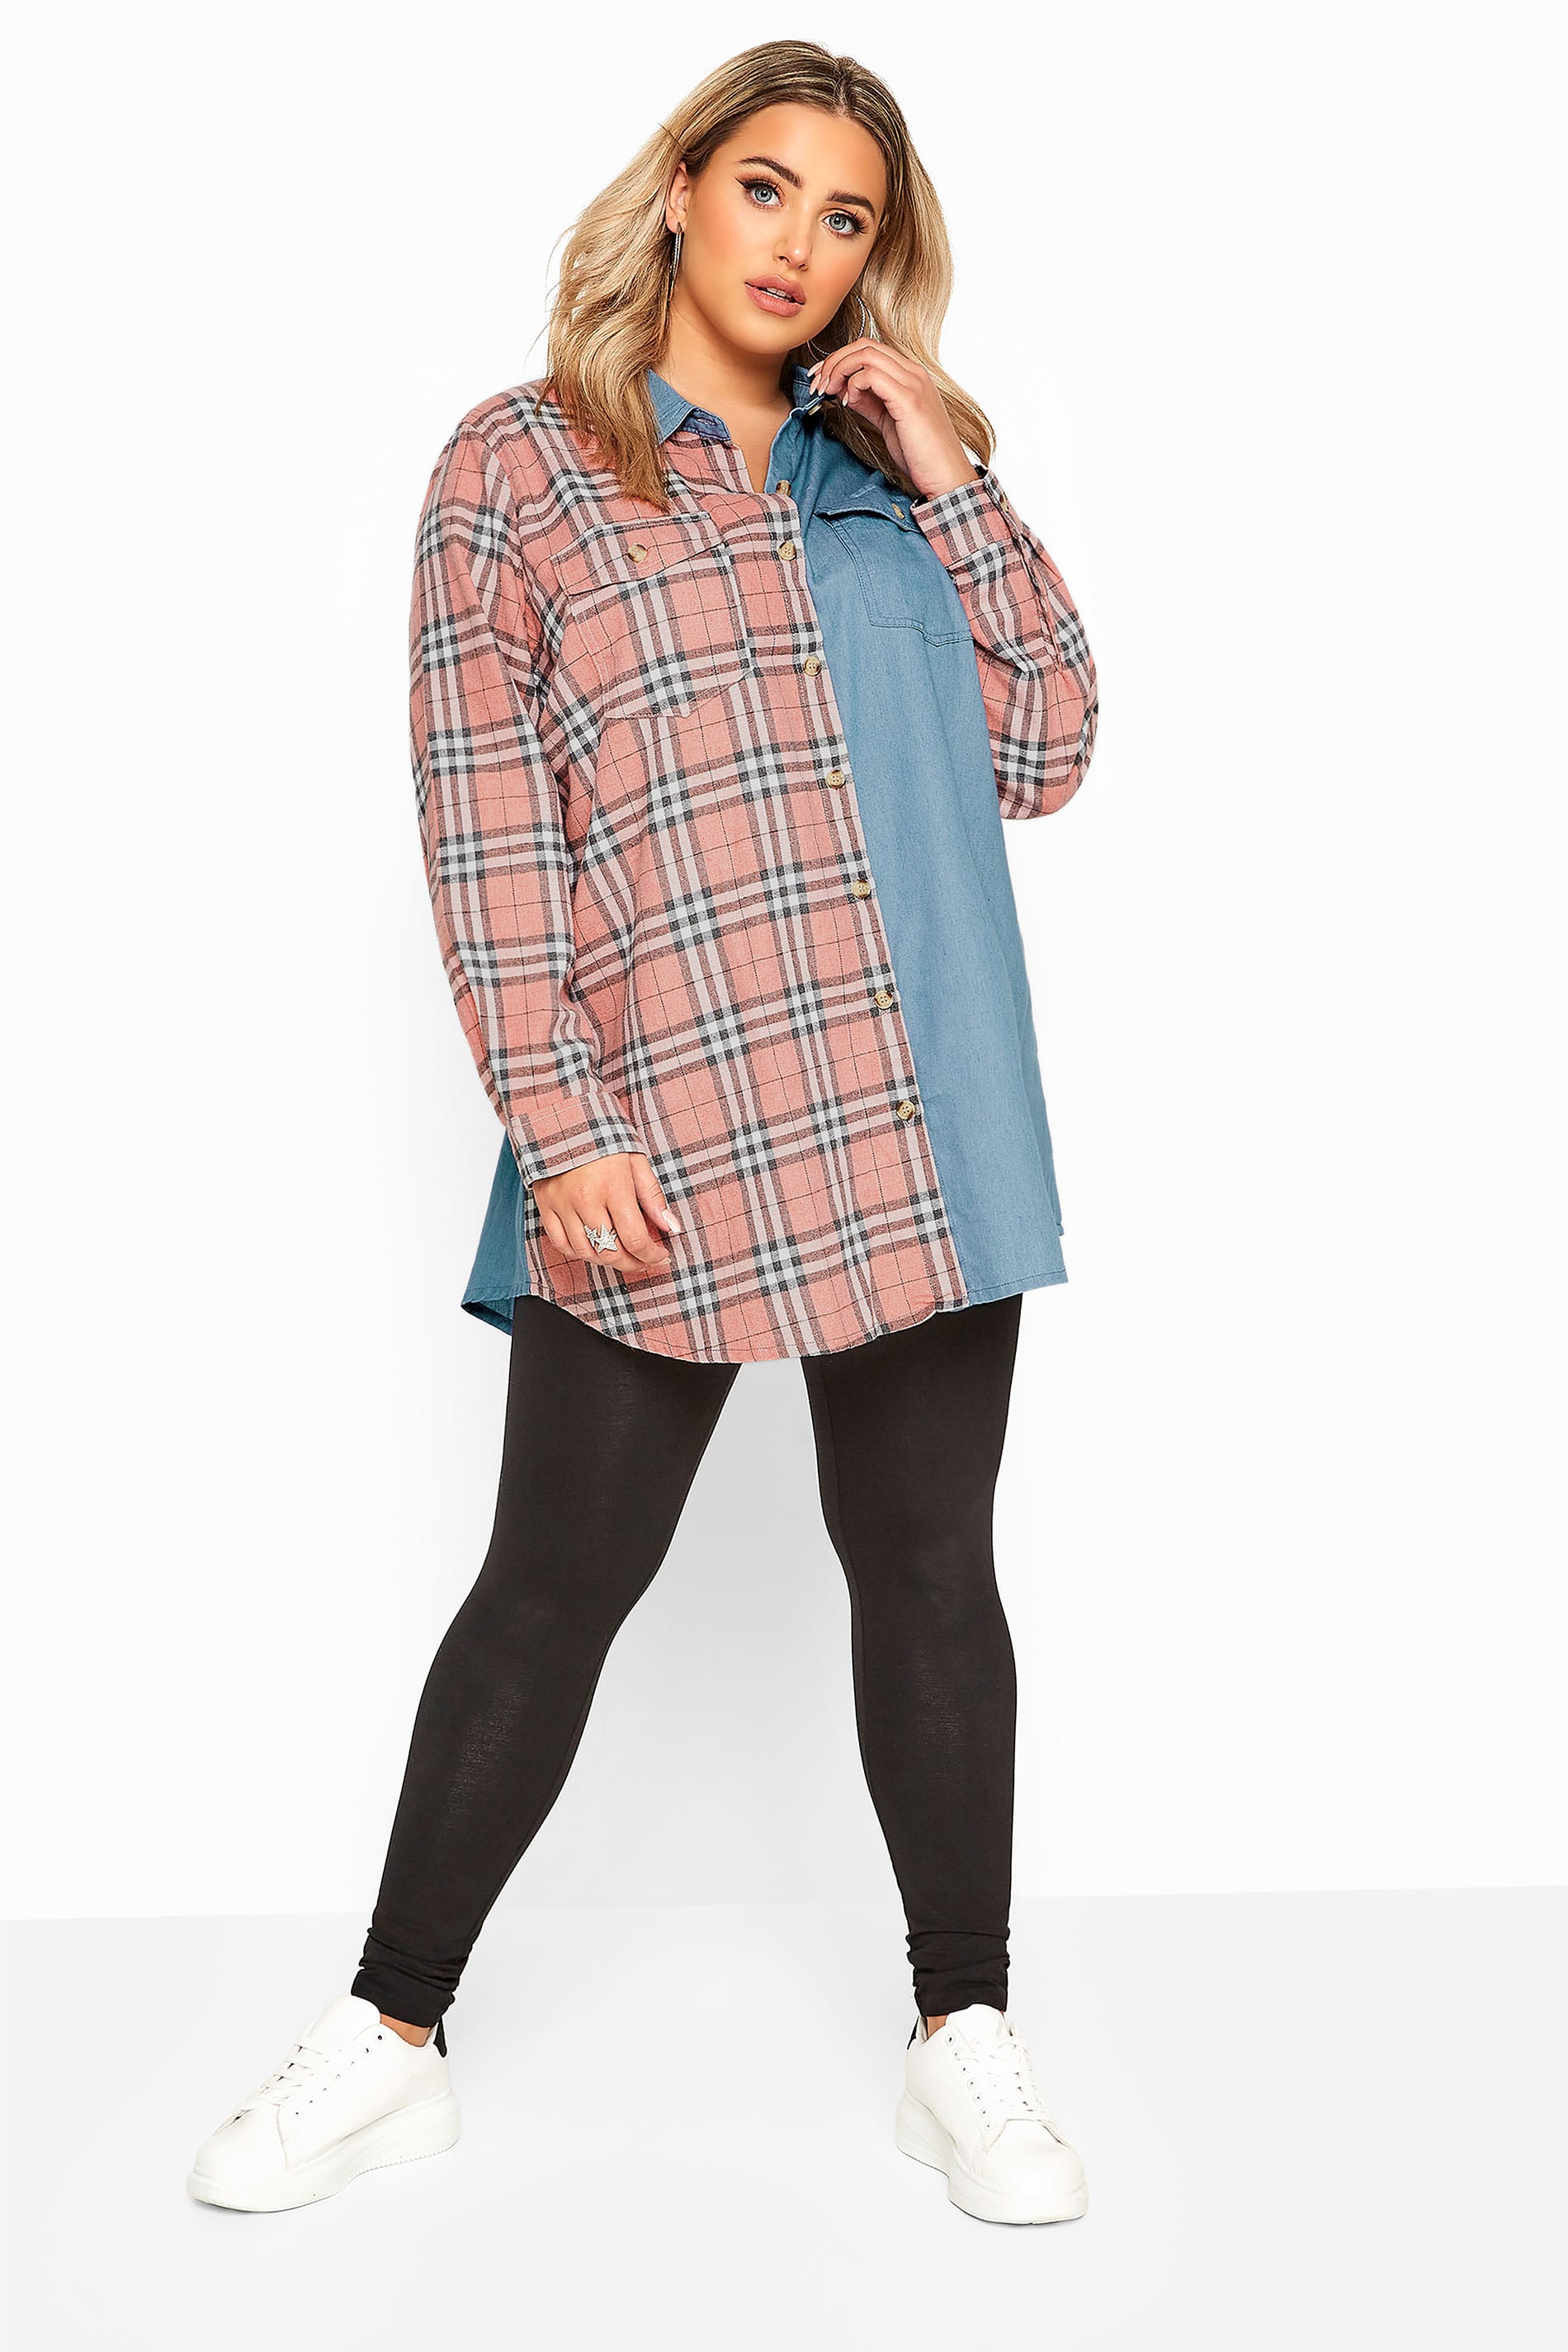 Blue & Pink Mixed Check Denim Shirt | Yours Clothing